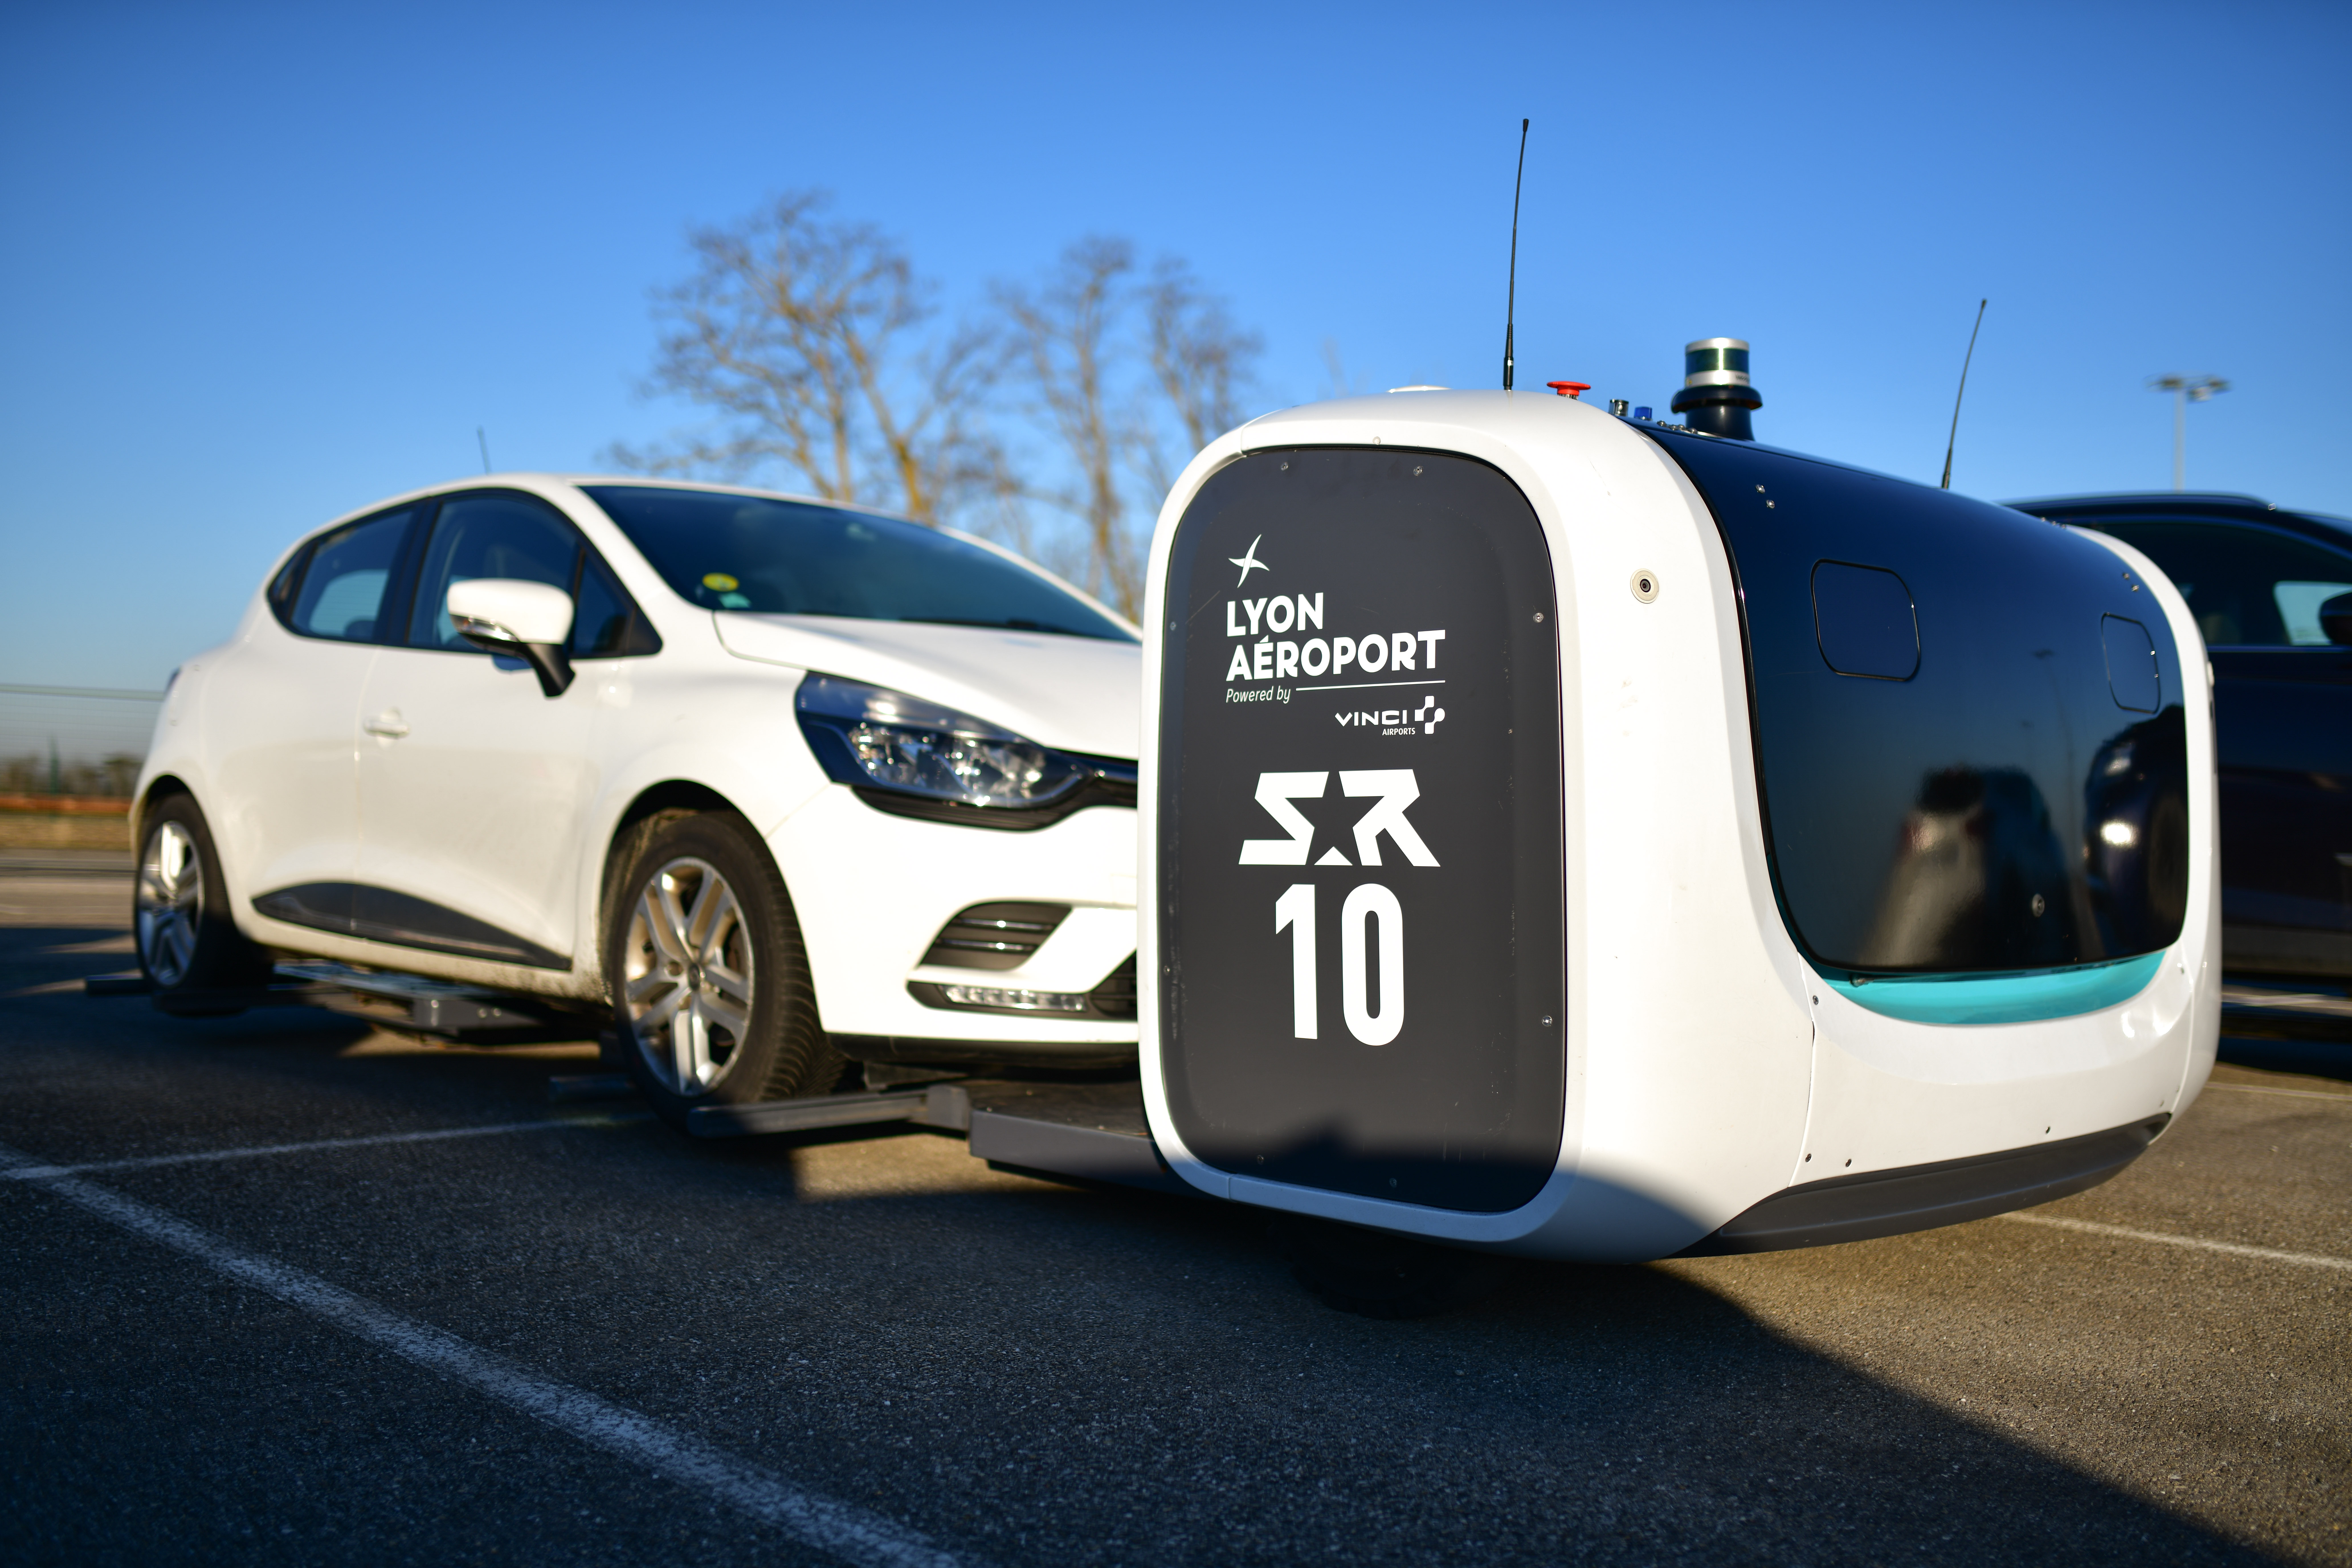 Lyon Airport is set to expand the car parking spaces managed by Stan the parking robot from 500 to 2,000